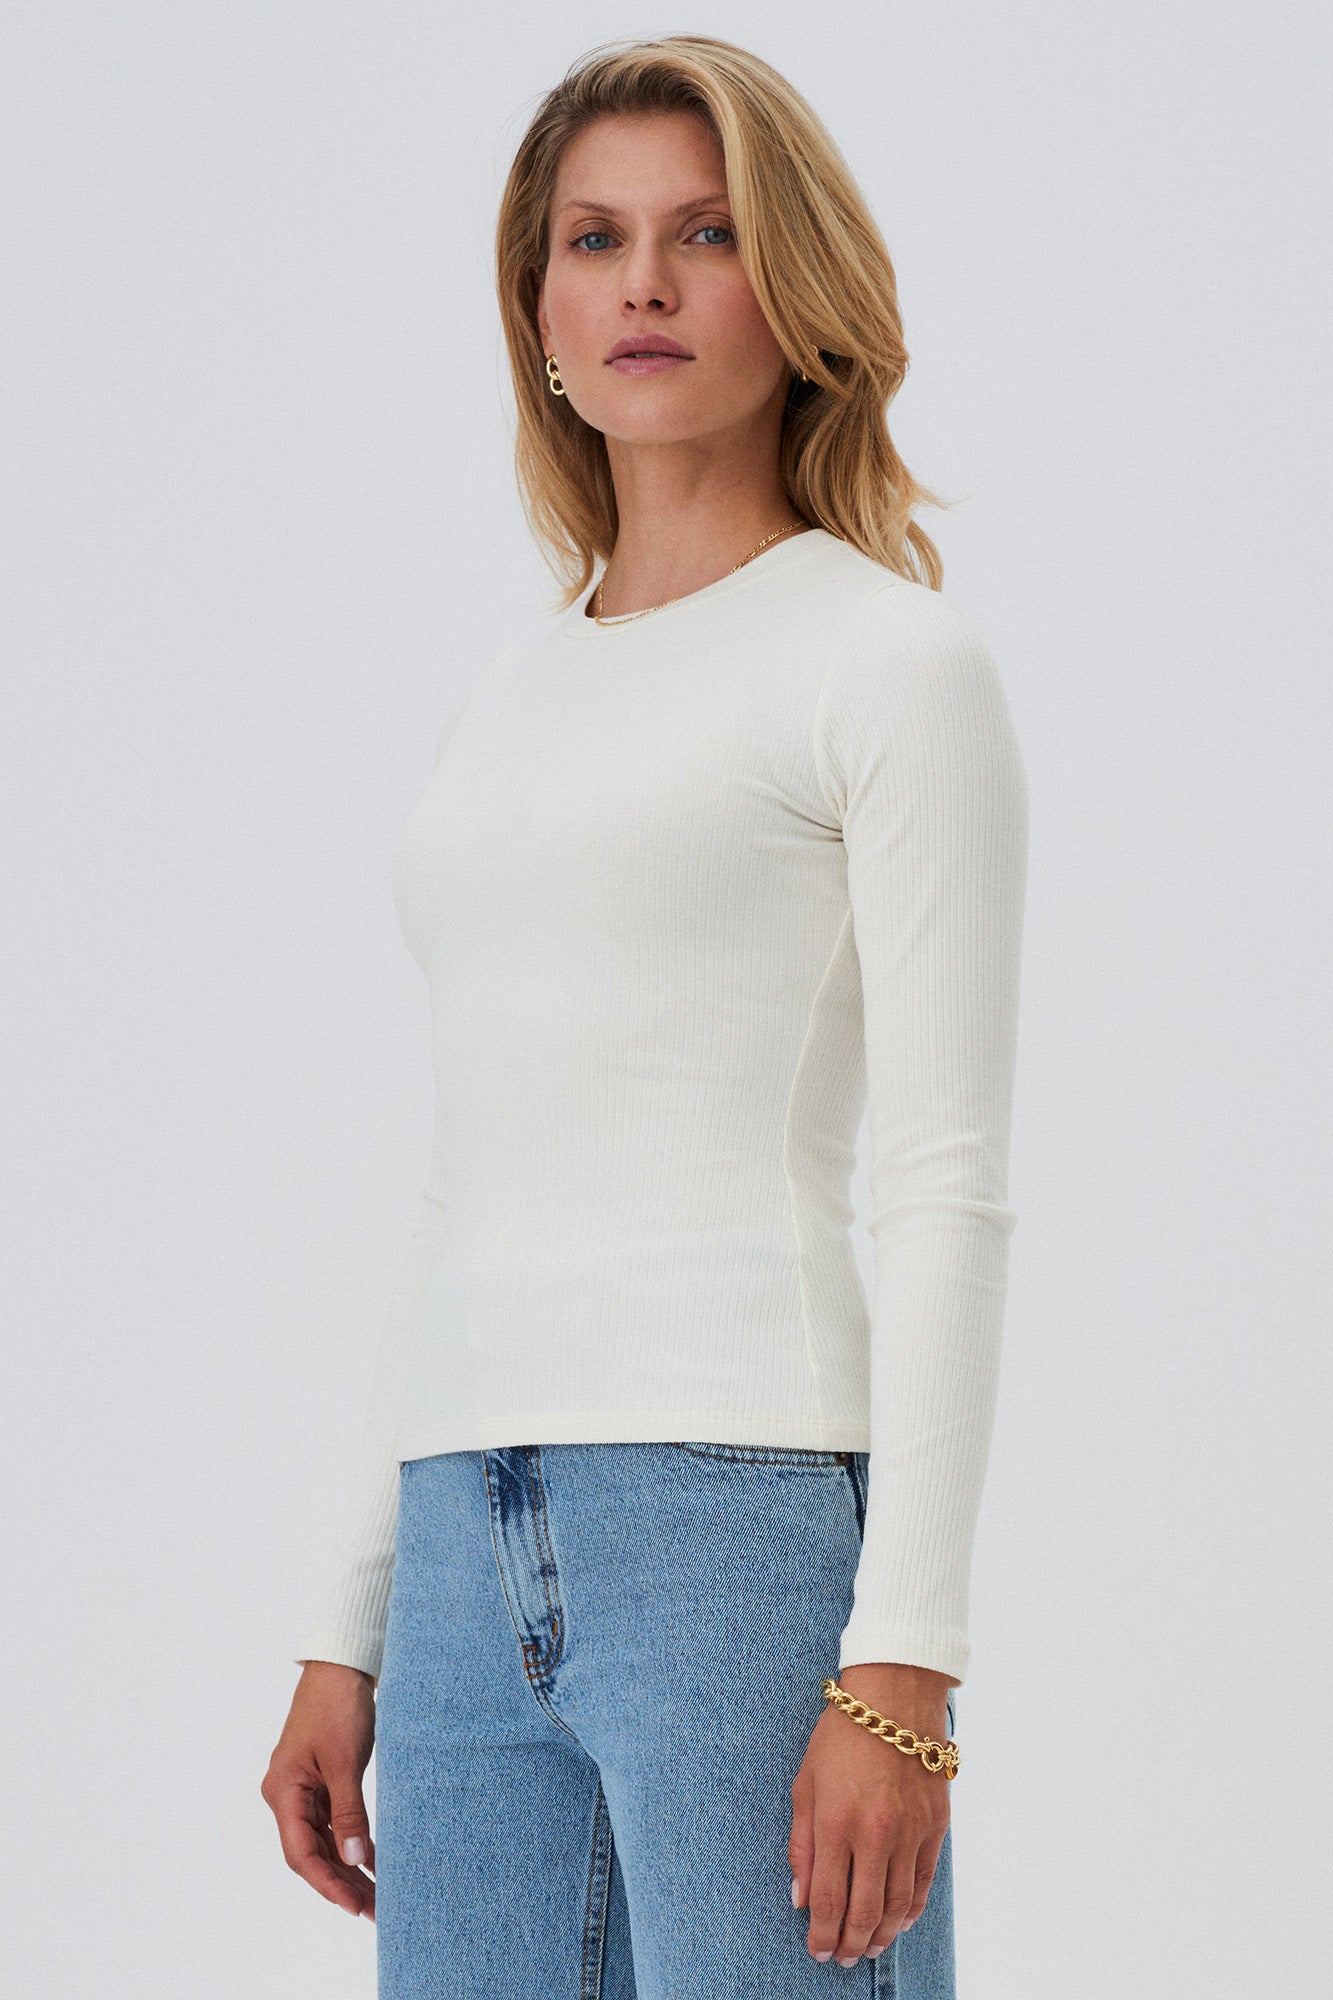 Longsleeve in organic cotton / 14 / 01 / cream white *cropped-jeans-from-recycled-cotton-05-12-light-indigo* ?The model is 177cm tall and wears size S? |